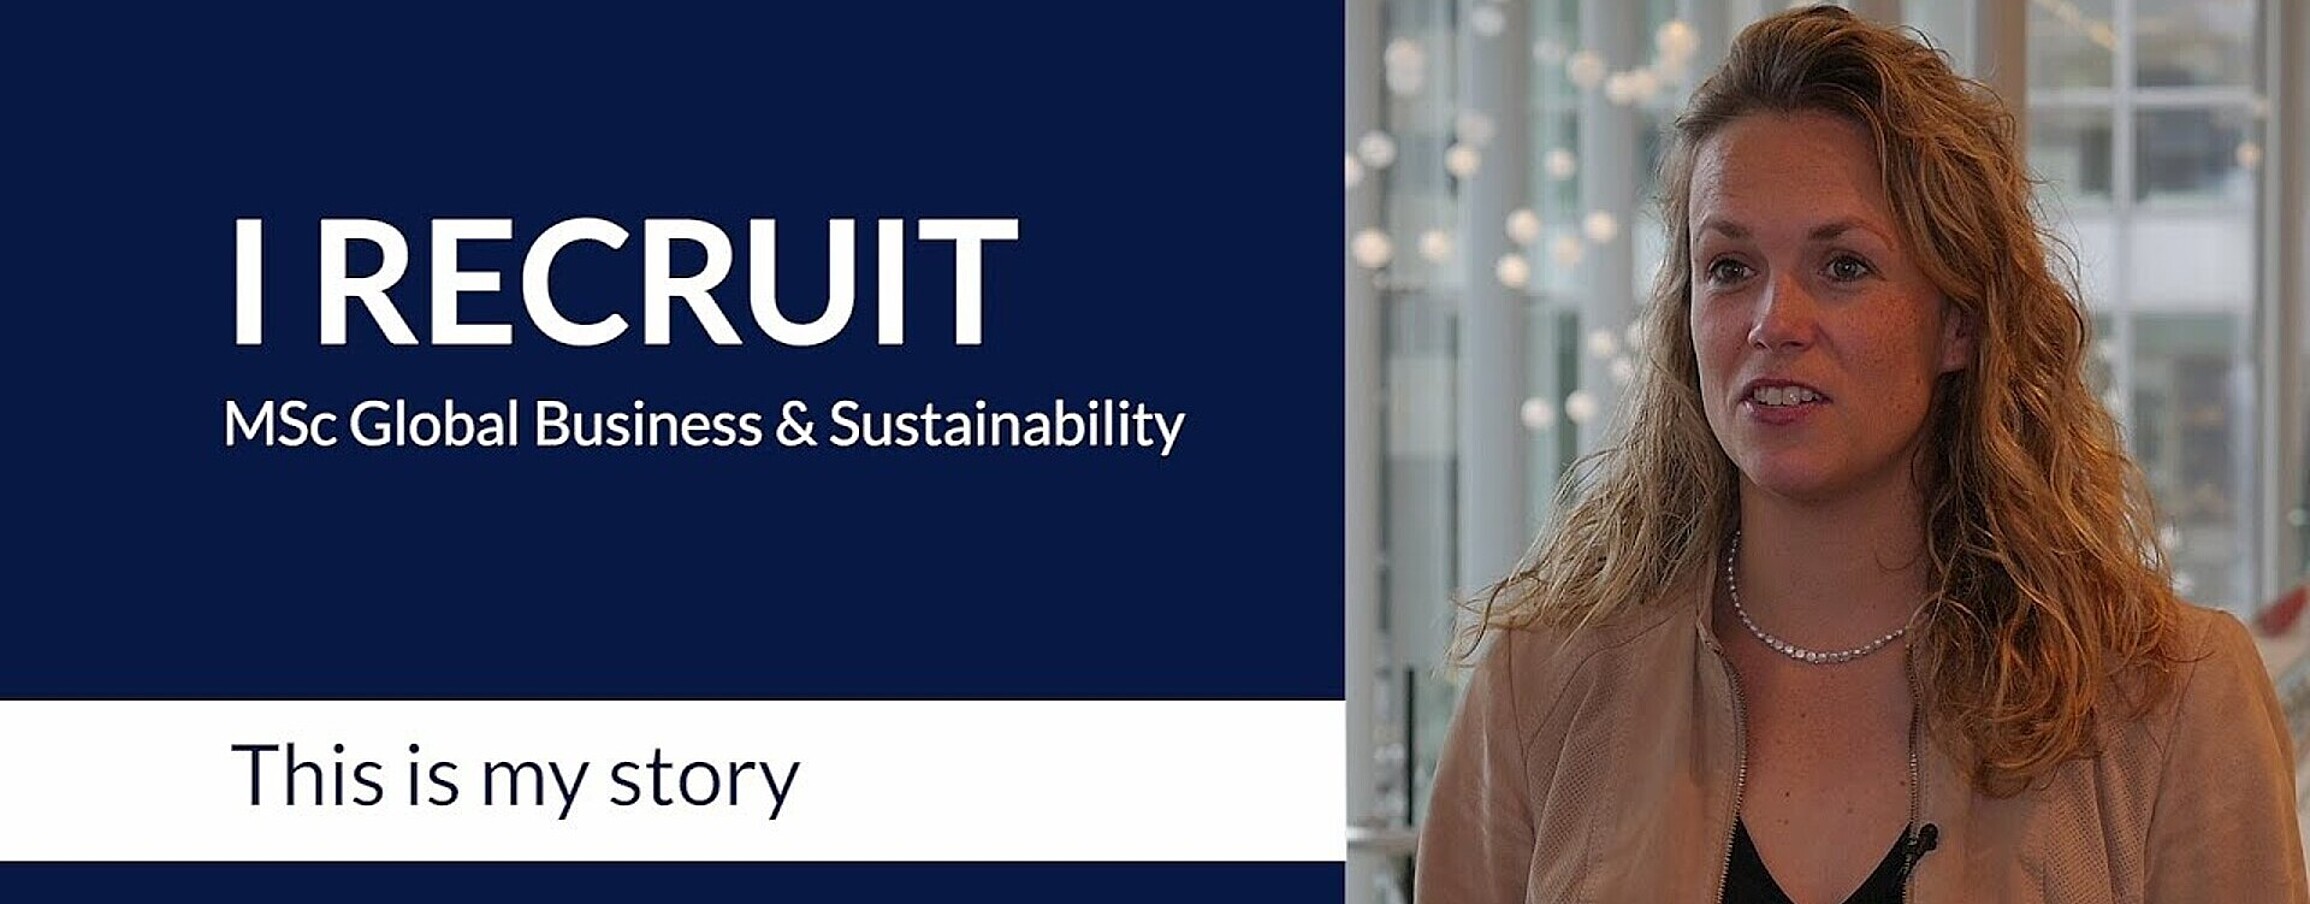 MSc Global Business & Sustainability recruiter